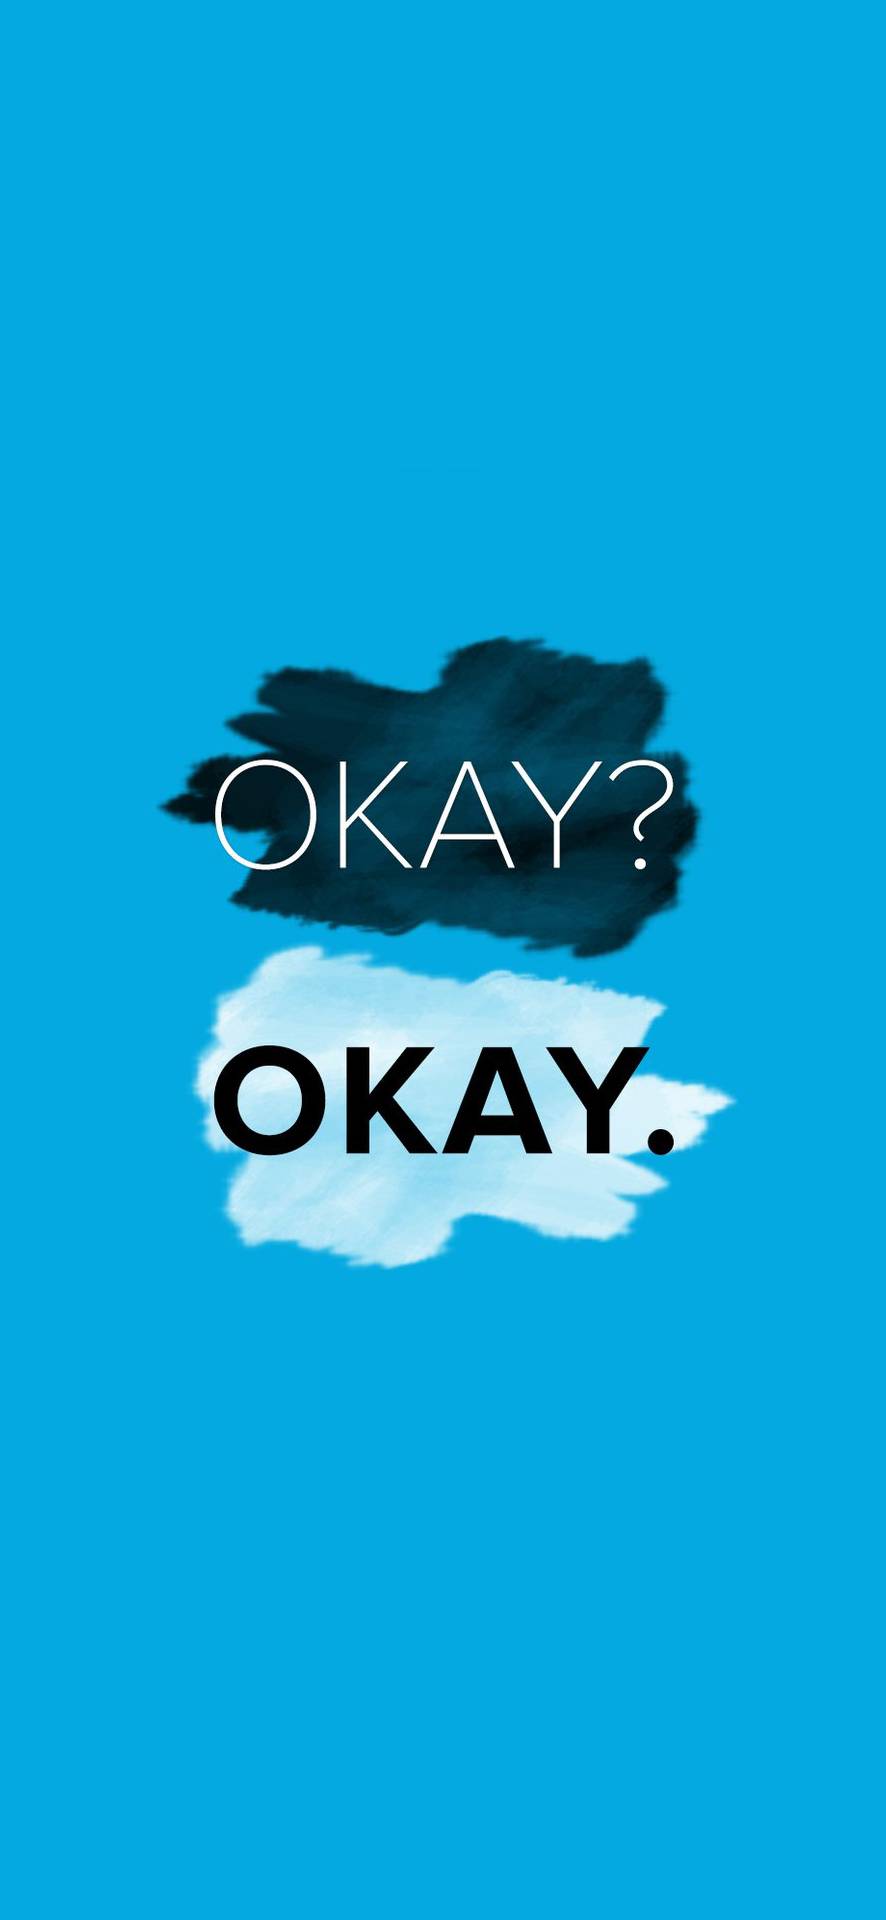 Okay Okay The Fault In Our Stars iphone wallpaper TFIOS  thefaultinourstars  The fault in our stars Iphone 5s wallpaper Iphone  wallpaper